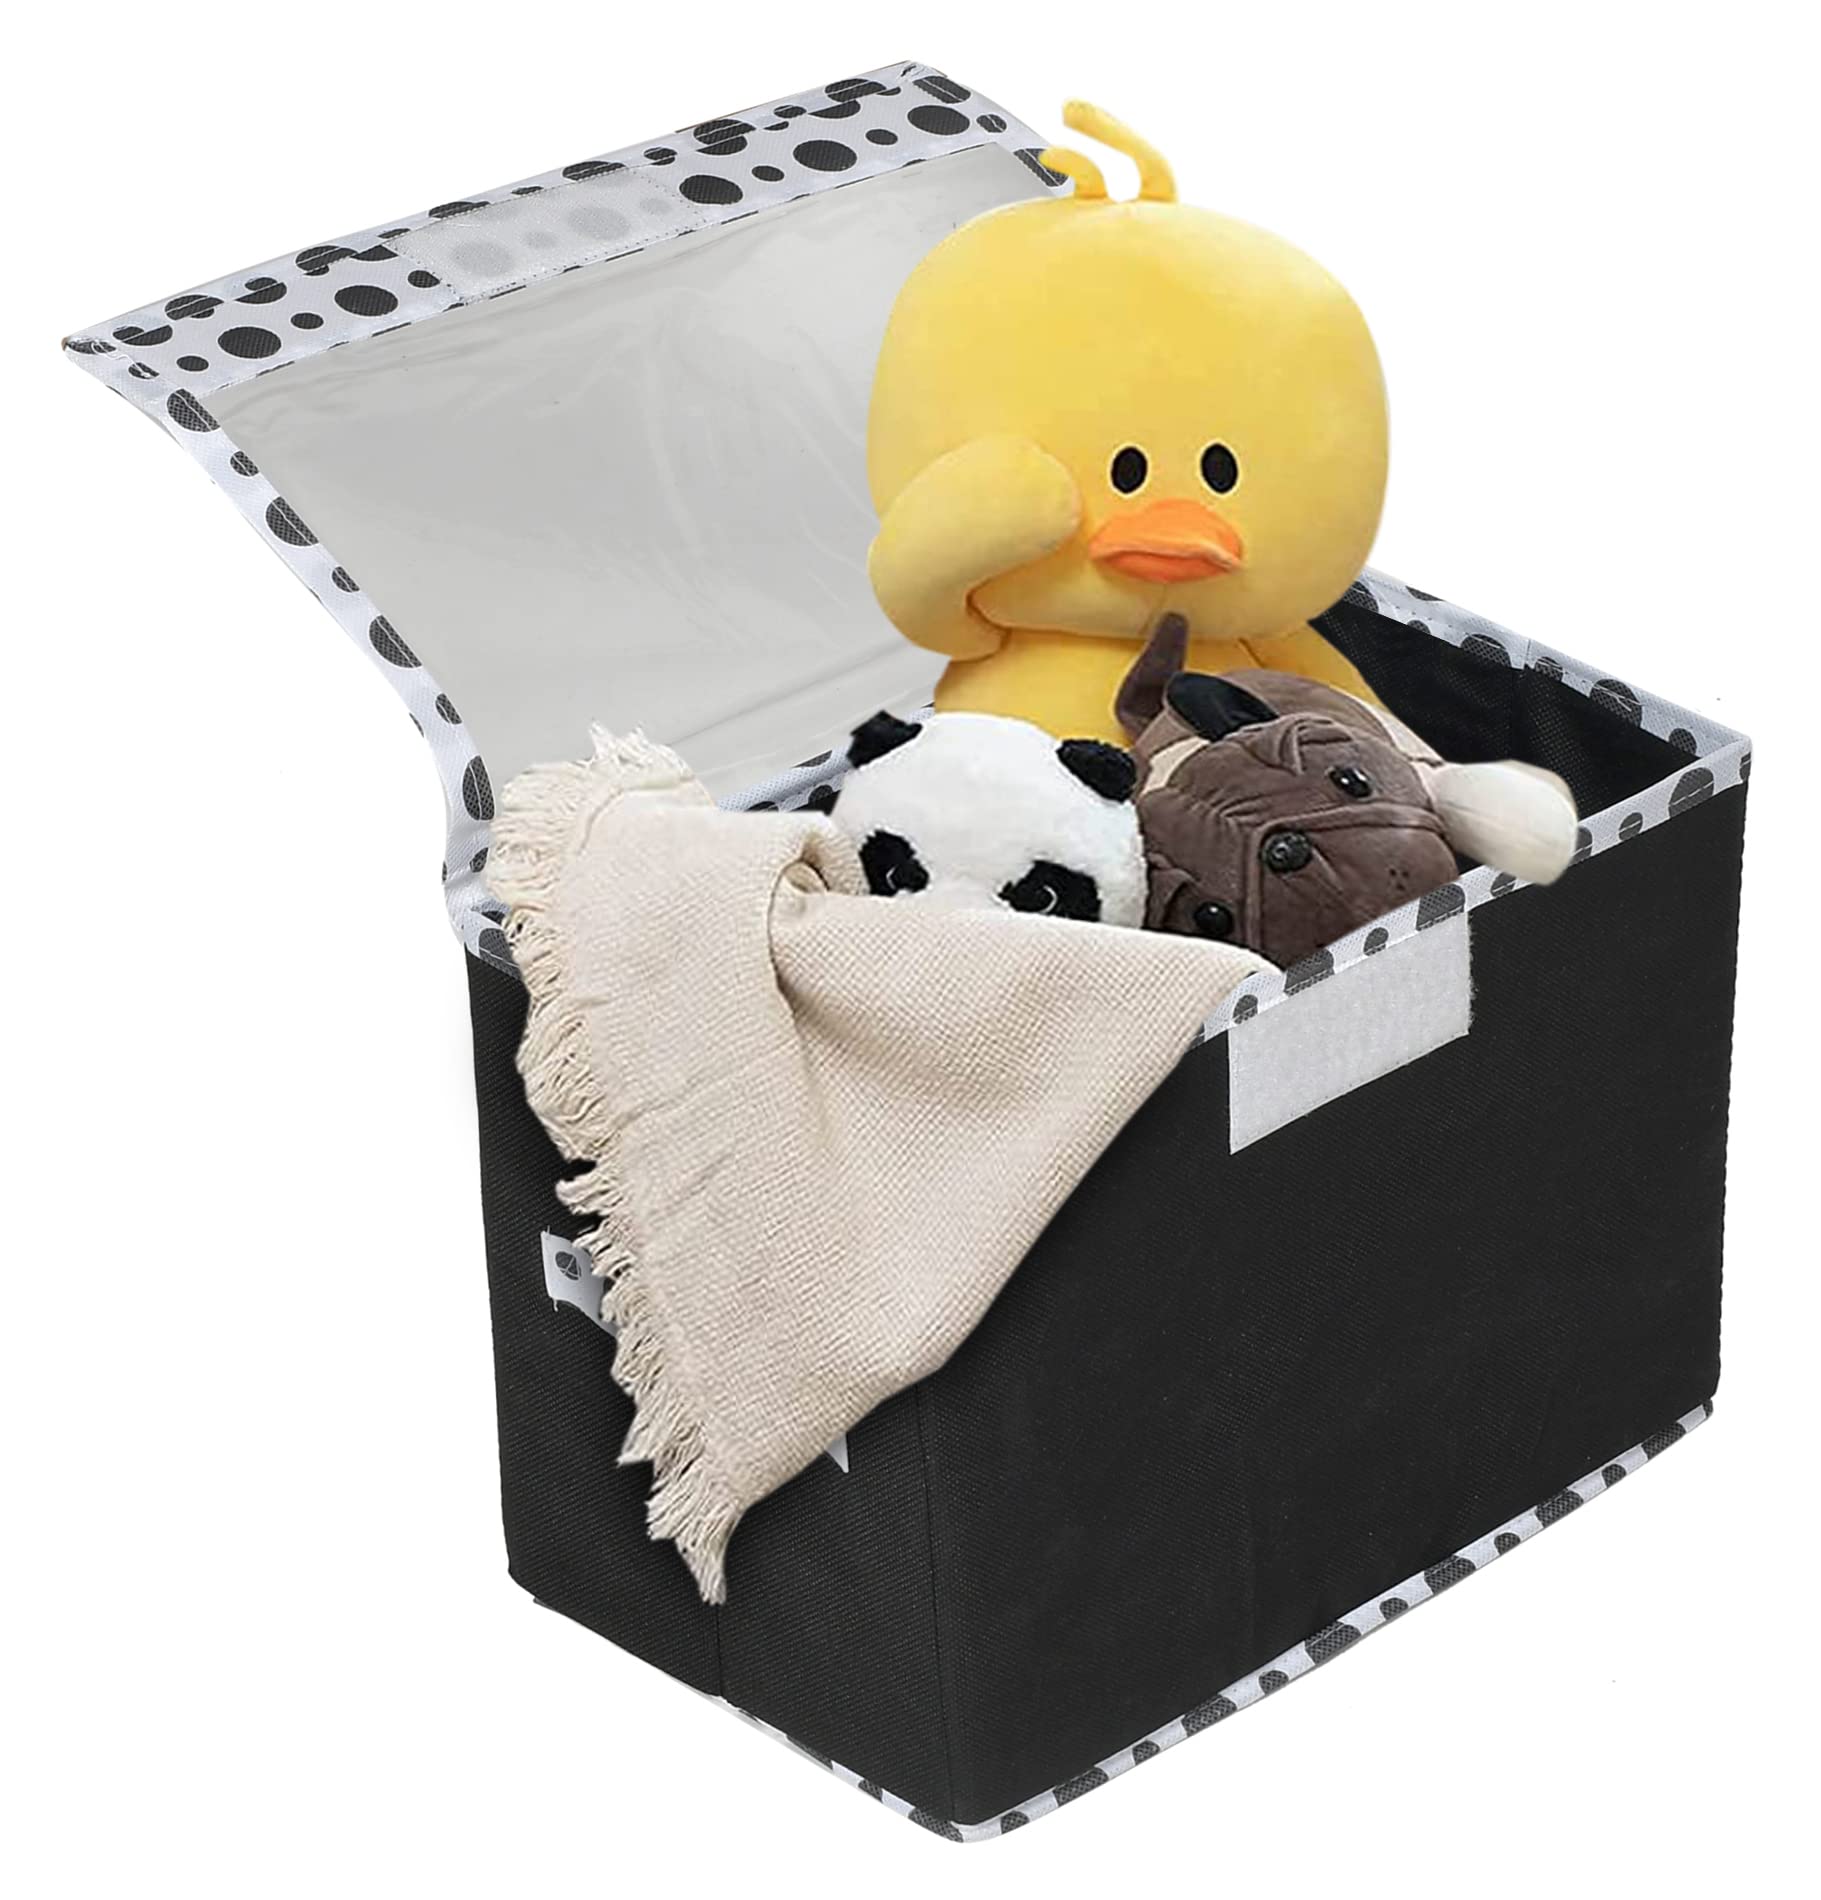 Heart Home Dot Printed Foldable Medium Non-Woven Storage Box/Bin For Books, Towels, Magazines, DVDs & More With Tranasparent Lid- Pack of 2 (Black) -44HH0418